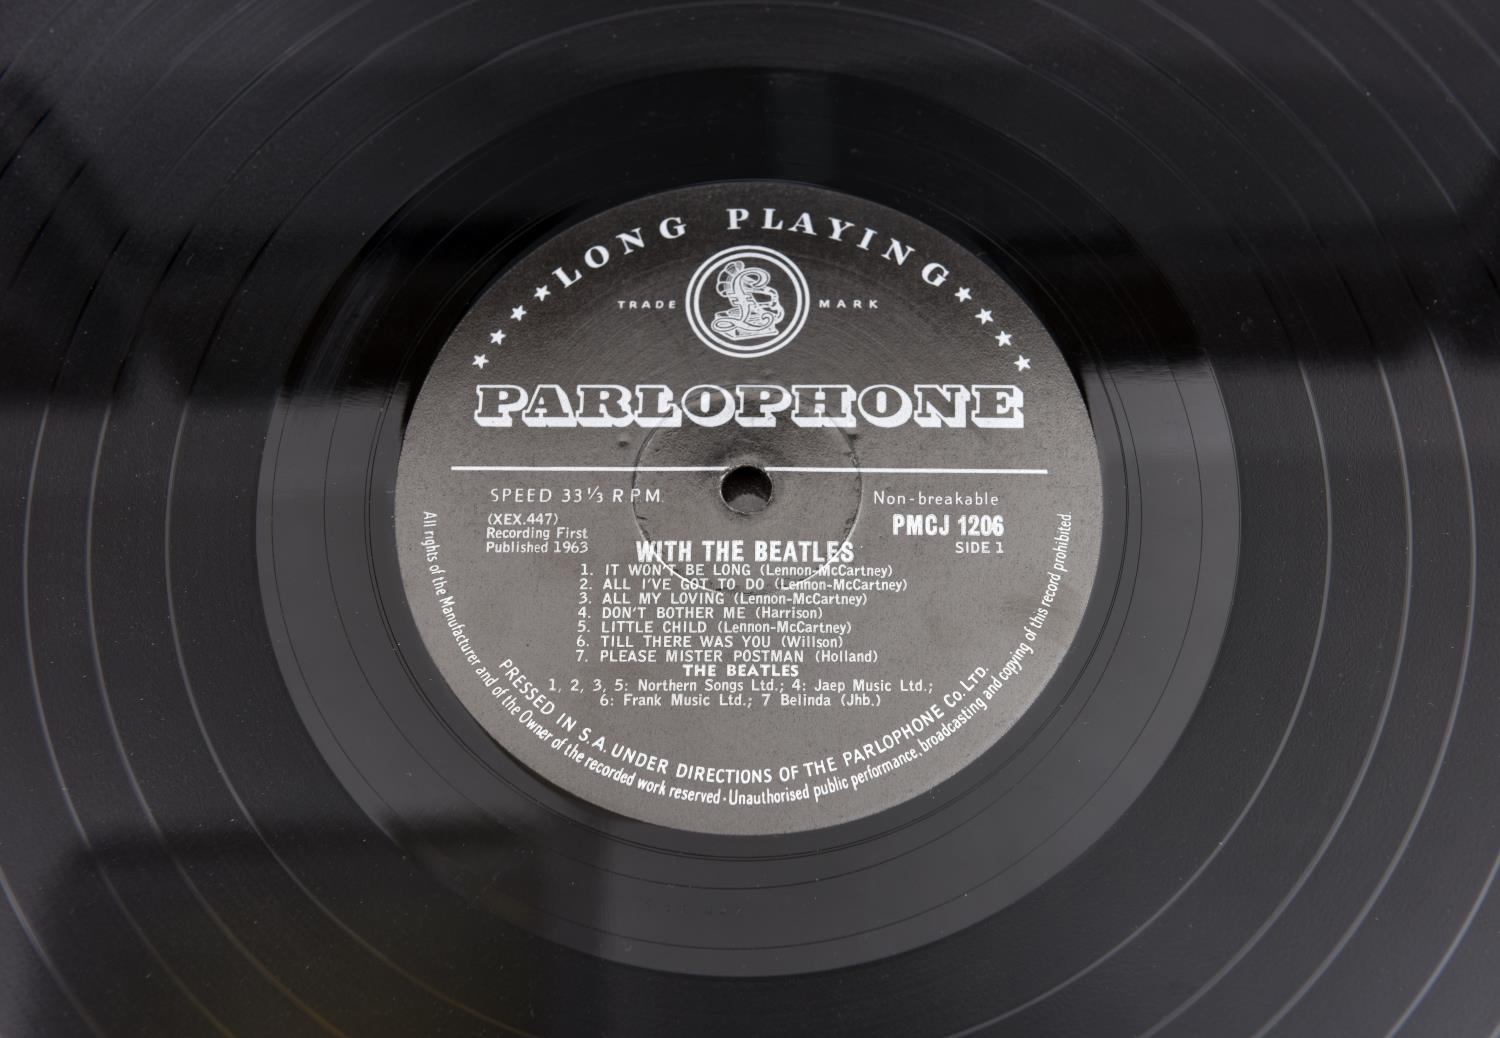 2x The Beatles 12" vinyl records, both South African pressings - Please Please Me. Parlophone - Image 3 of 3